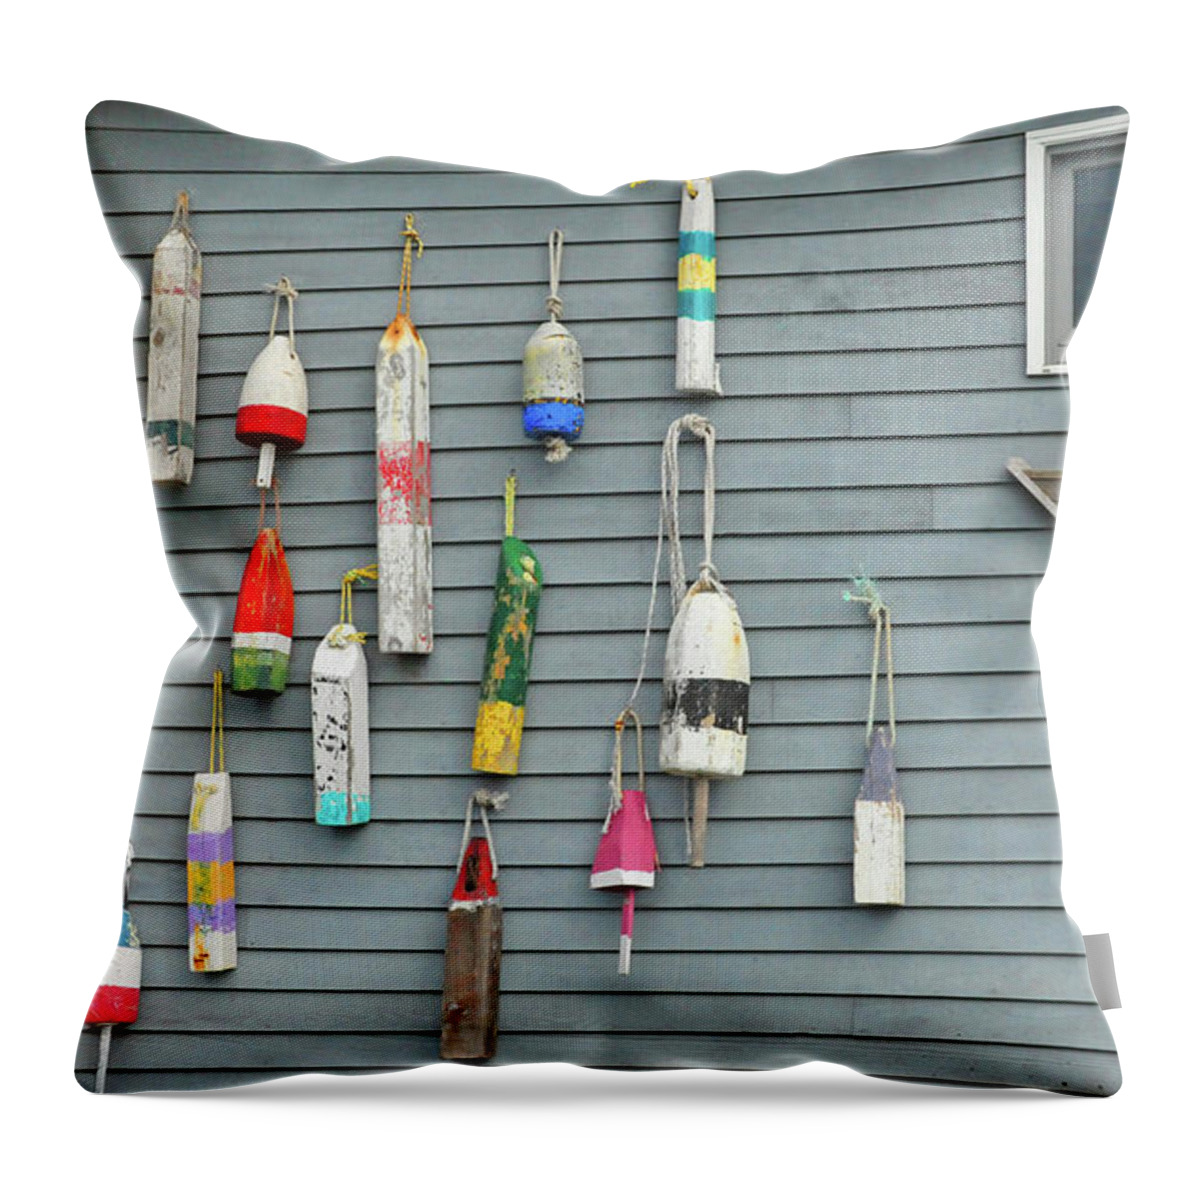 Hanging Throw Pillow featuring the photograph Colorful Buoys Hanging On Side Of House by Heather Paul